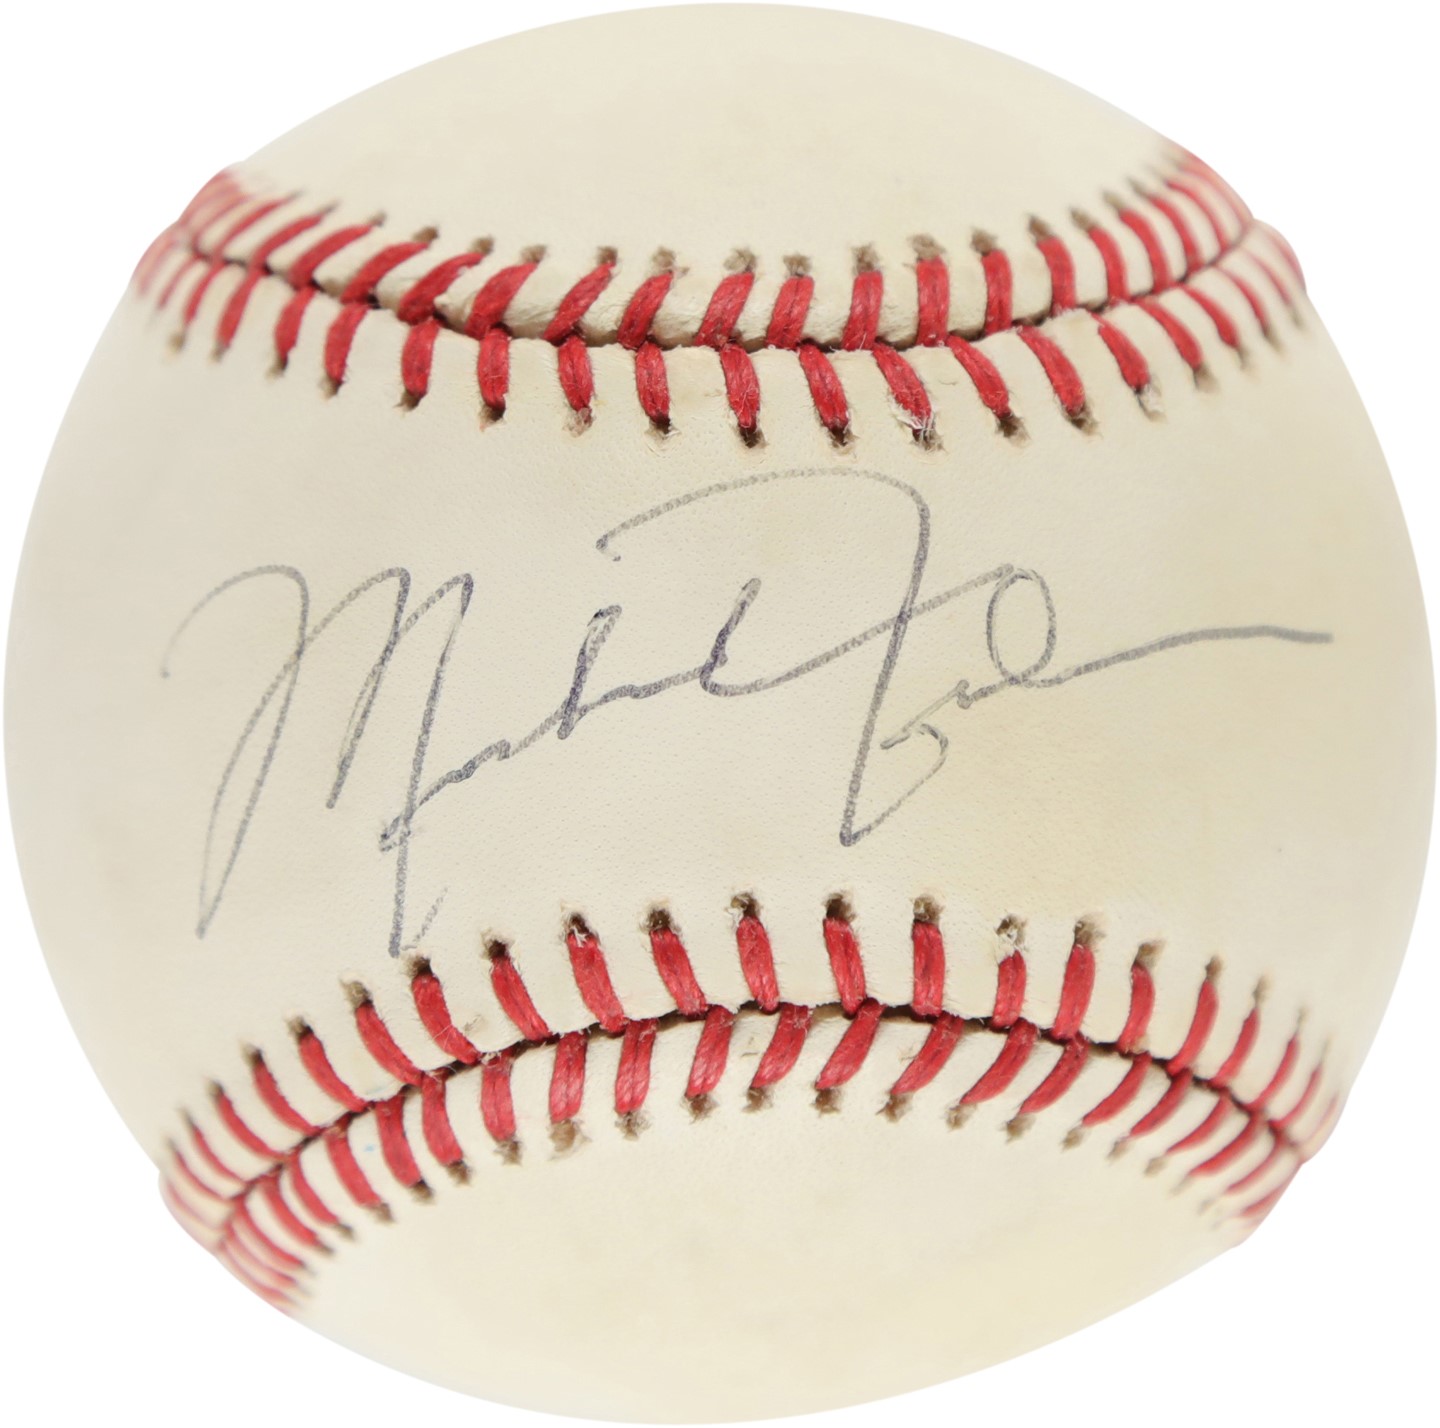 - Michael Jordan Single-Signed Baseball Obtained in Person by White Sox Scout (PSA)